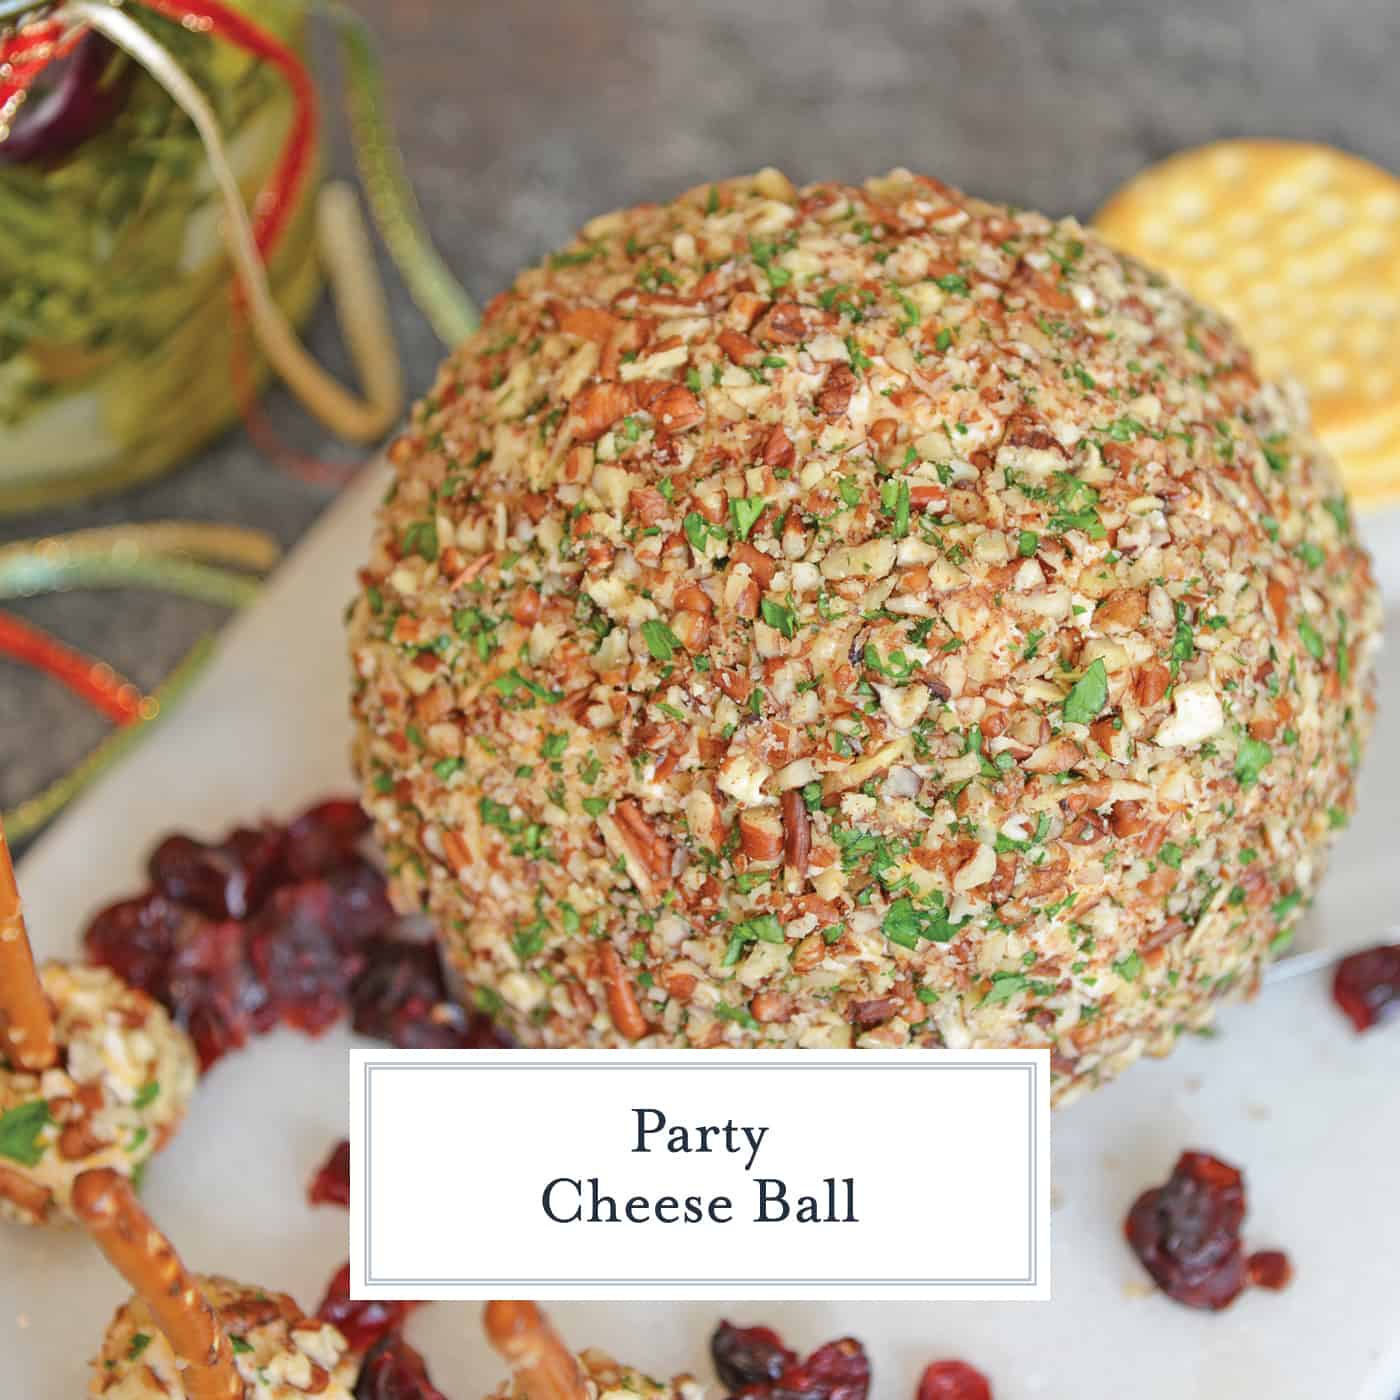 This cheese ball with cream cheese is a classic Party Cheese Ball recipe, made with simple ingredients. A must-make for any and all parties! #partycheeseballrecipe #creamcheeseball www.savoryexperiments.com